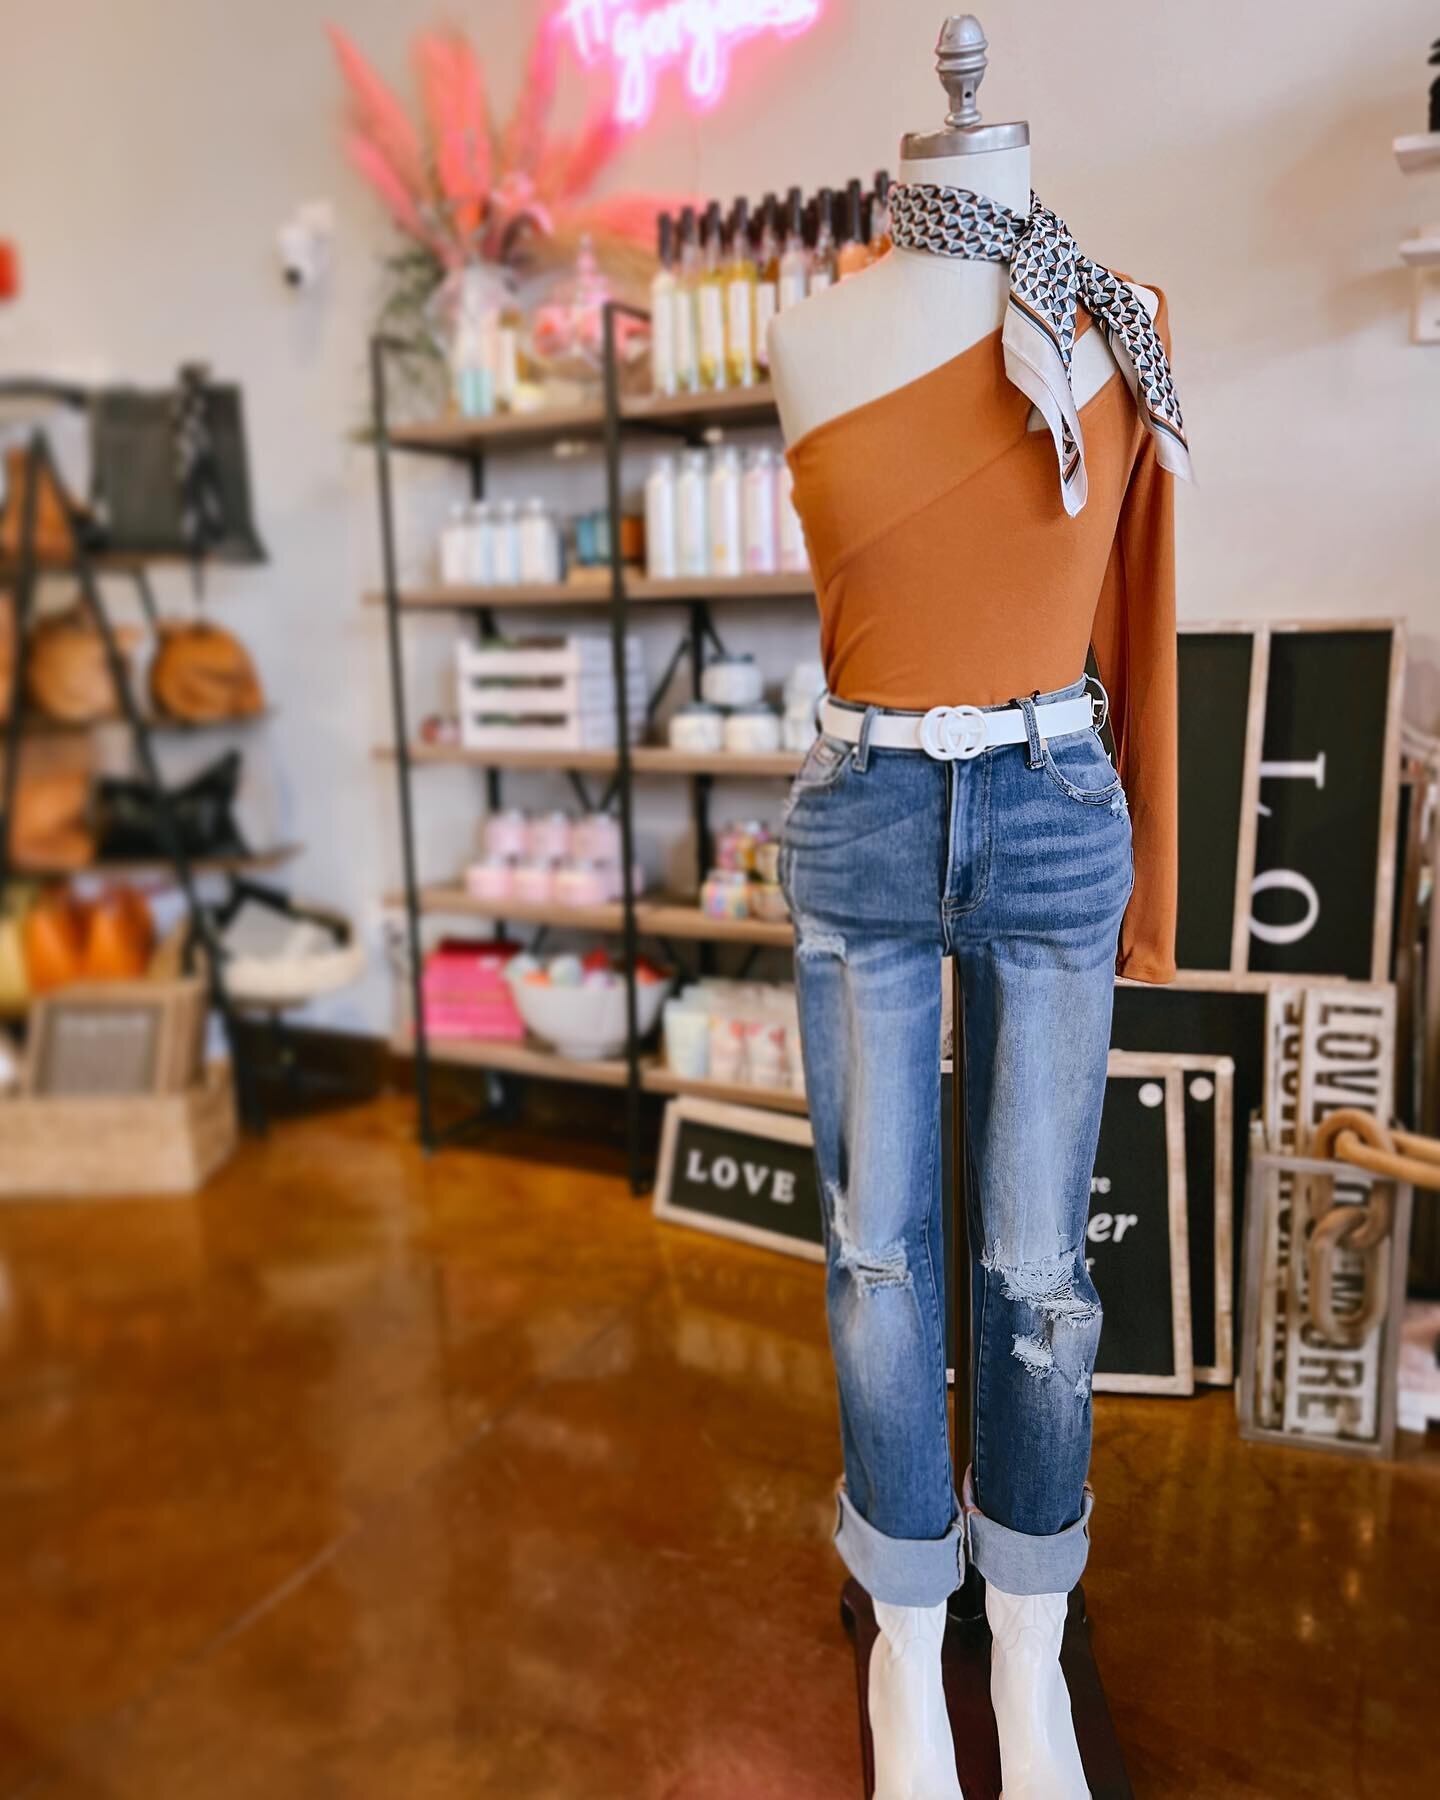 New arrivals in Spring Accessories!  Brighten up your winter wardrobe with a P&bull;O&bull;P of white and a bold ker&bull;chief 💕🥰

#newarrivals #accessories #musthave #springfashion #ibeniboutique #meridianidaho #boise